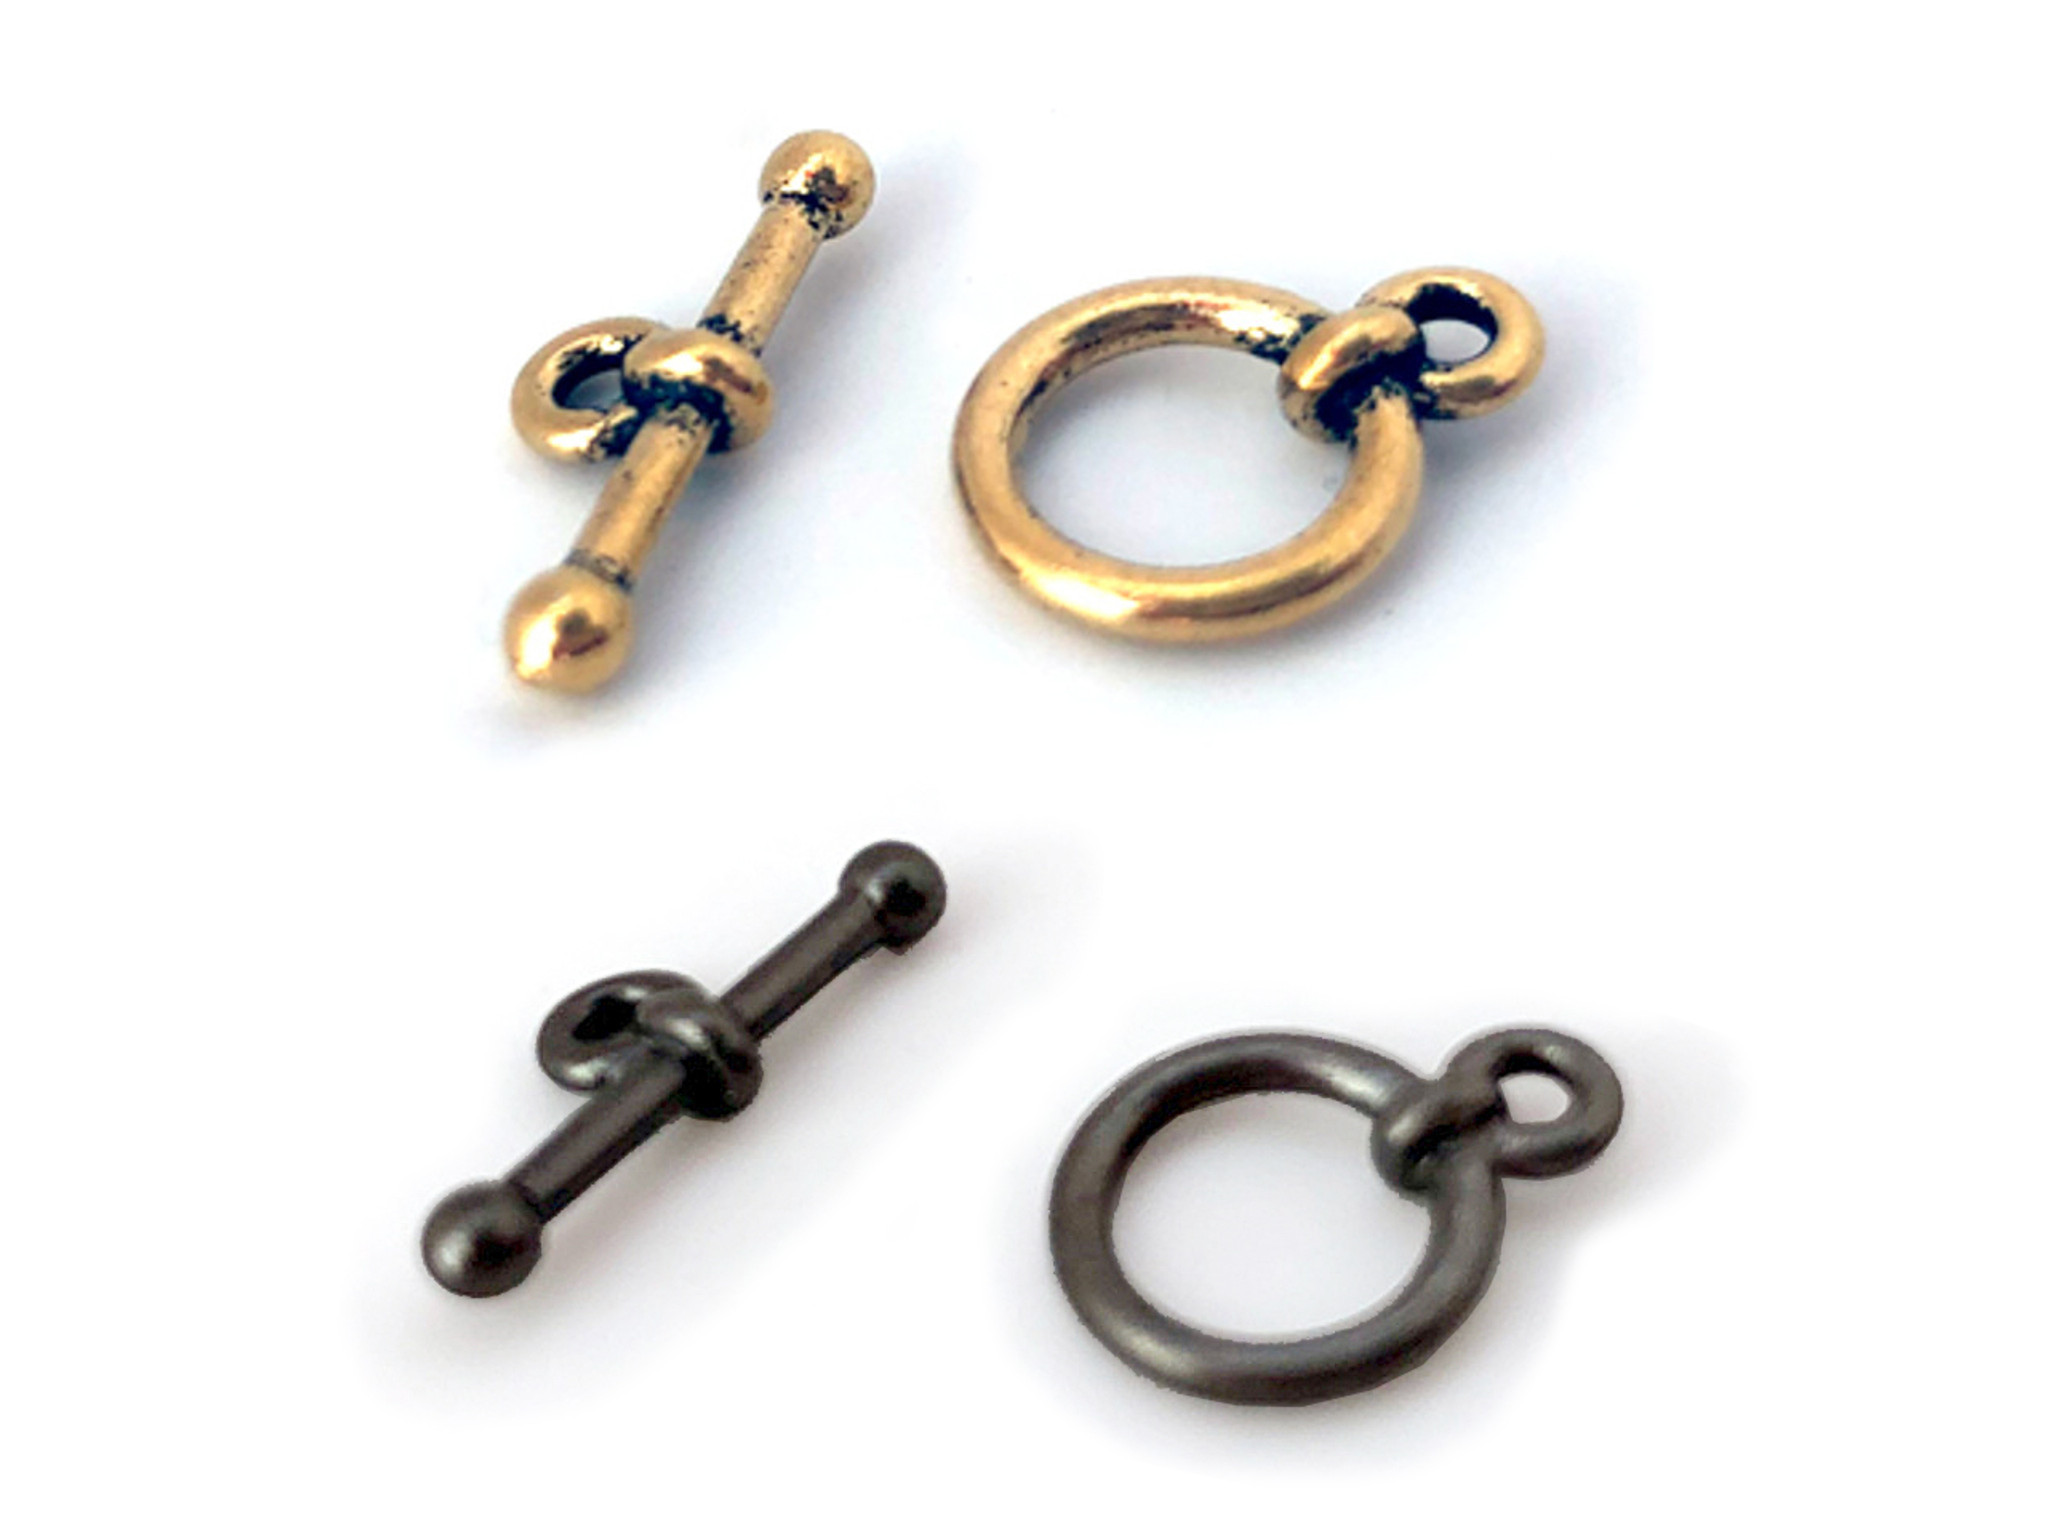 10mm Anna's Clasps for Handcrafted Jewelry Making